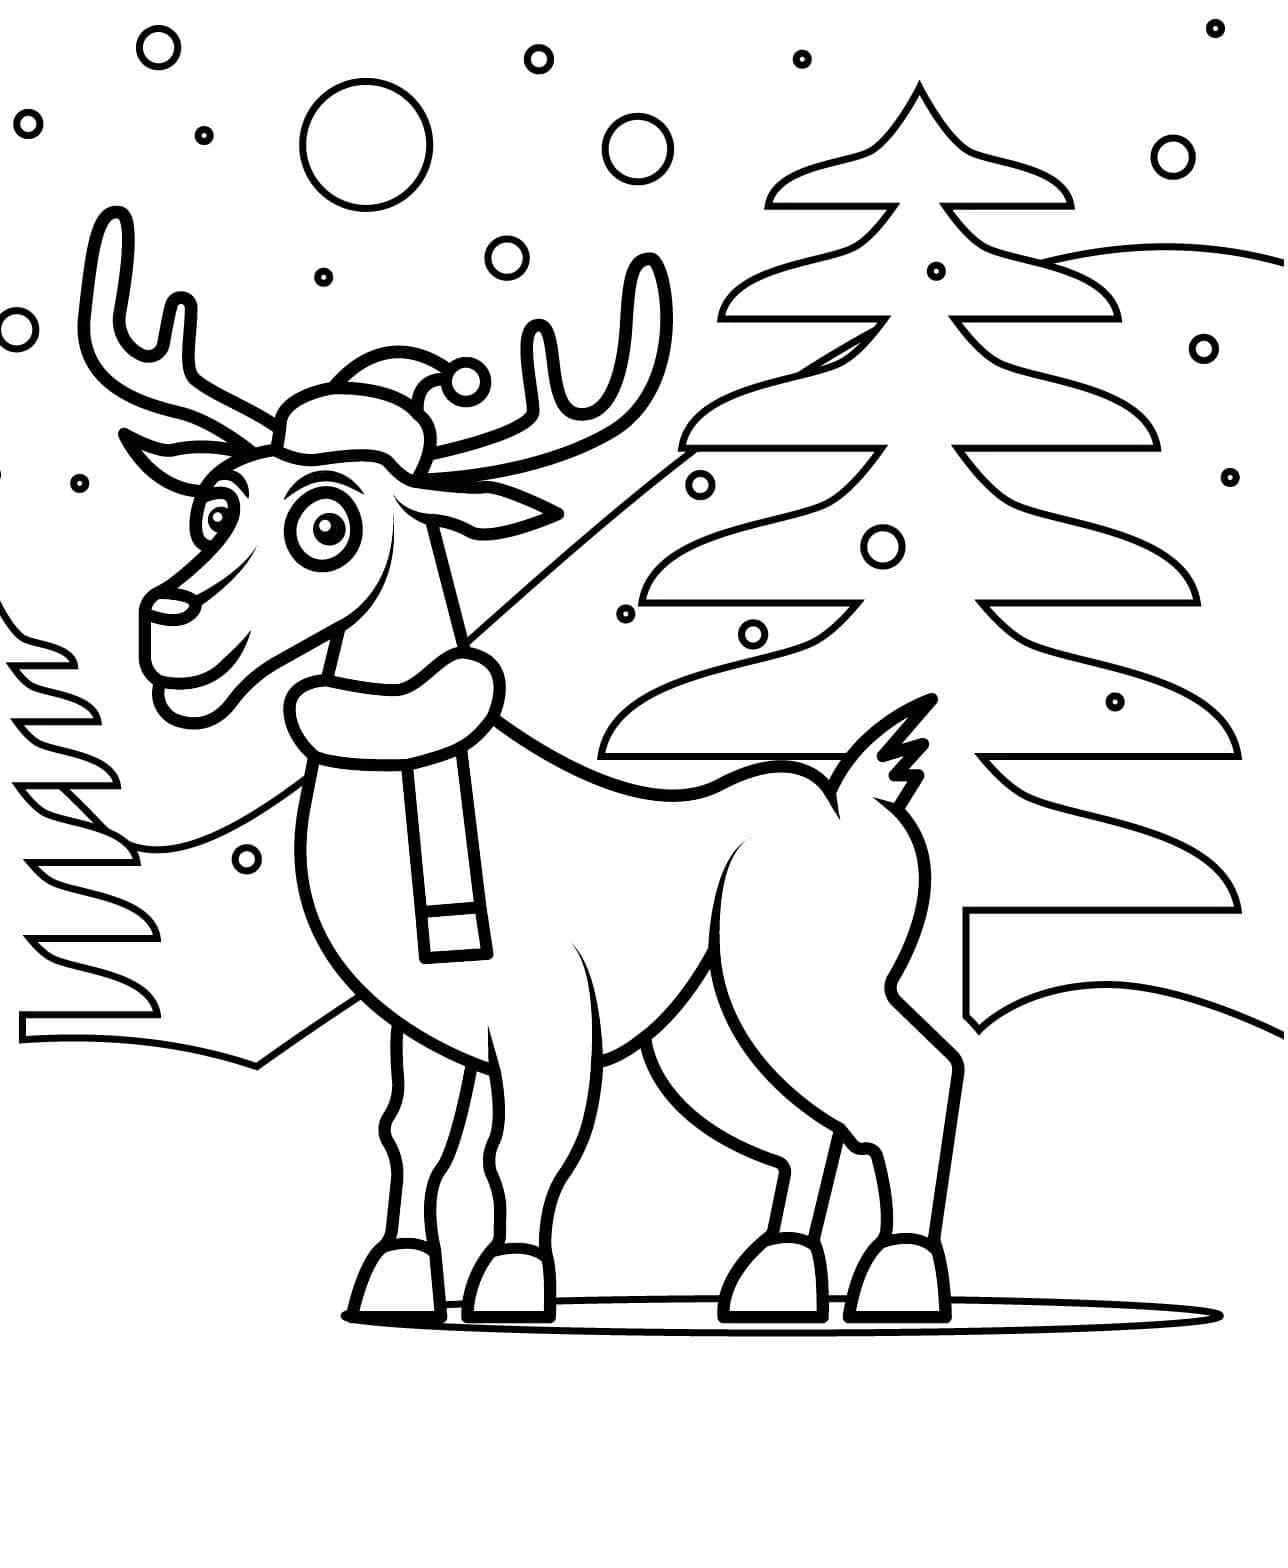 Dressed Up For The Holiday Coloring Page